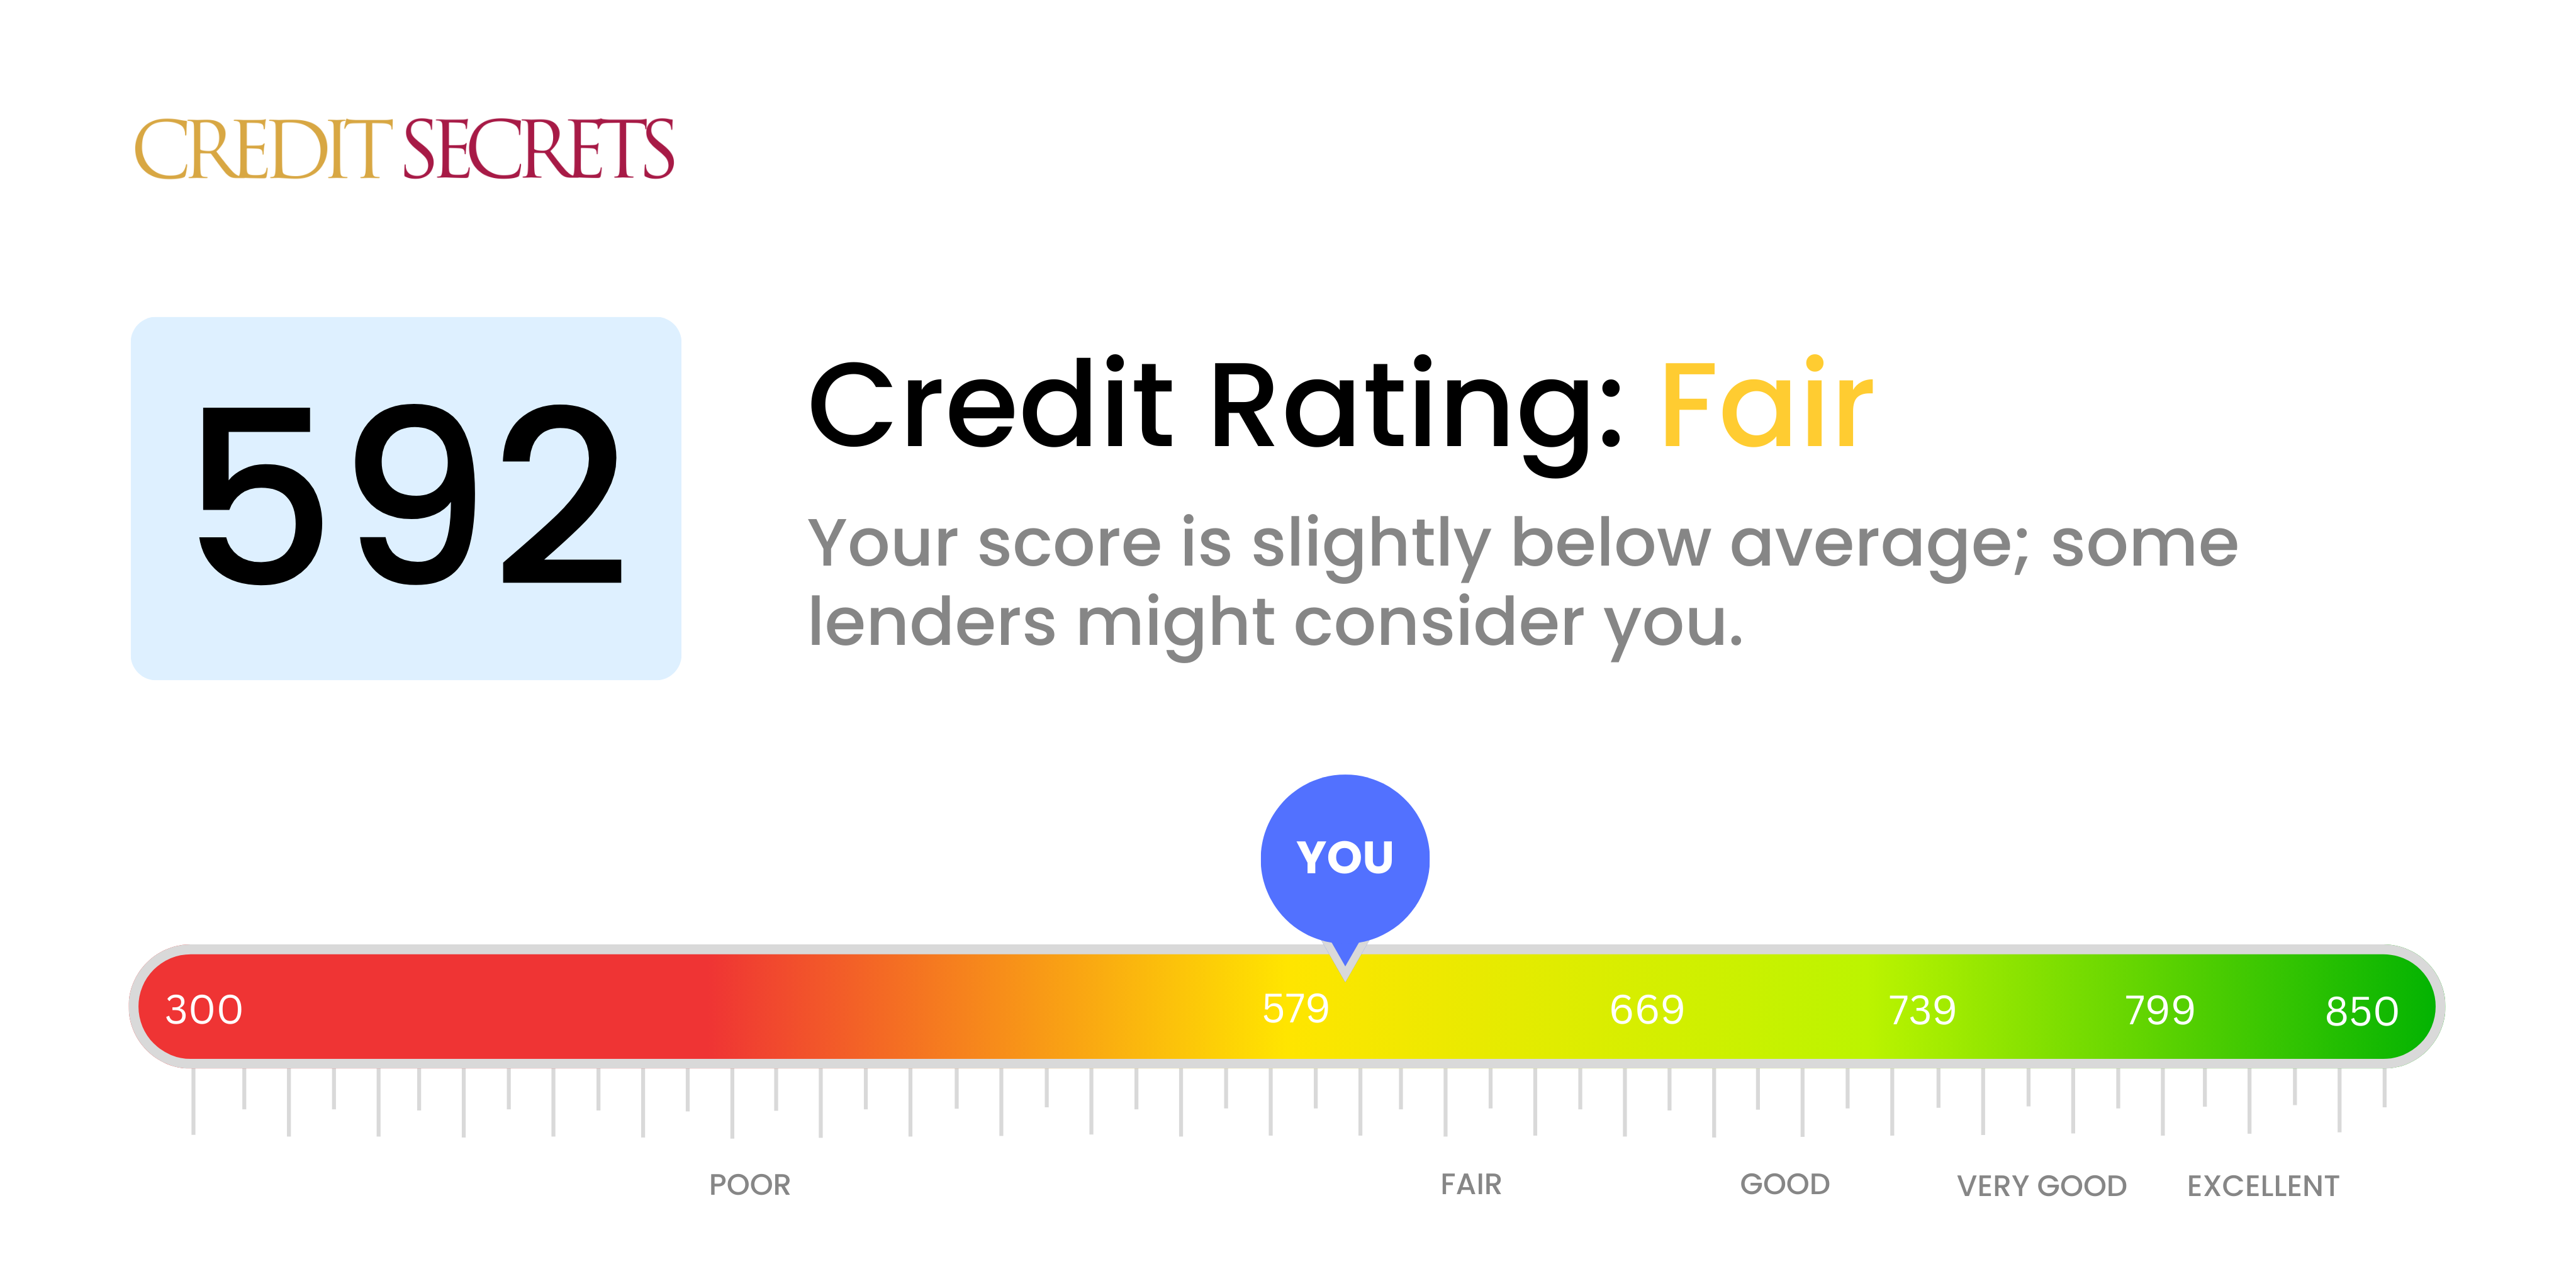 Is 592 a good credit score?